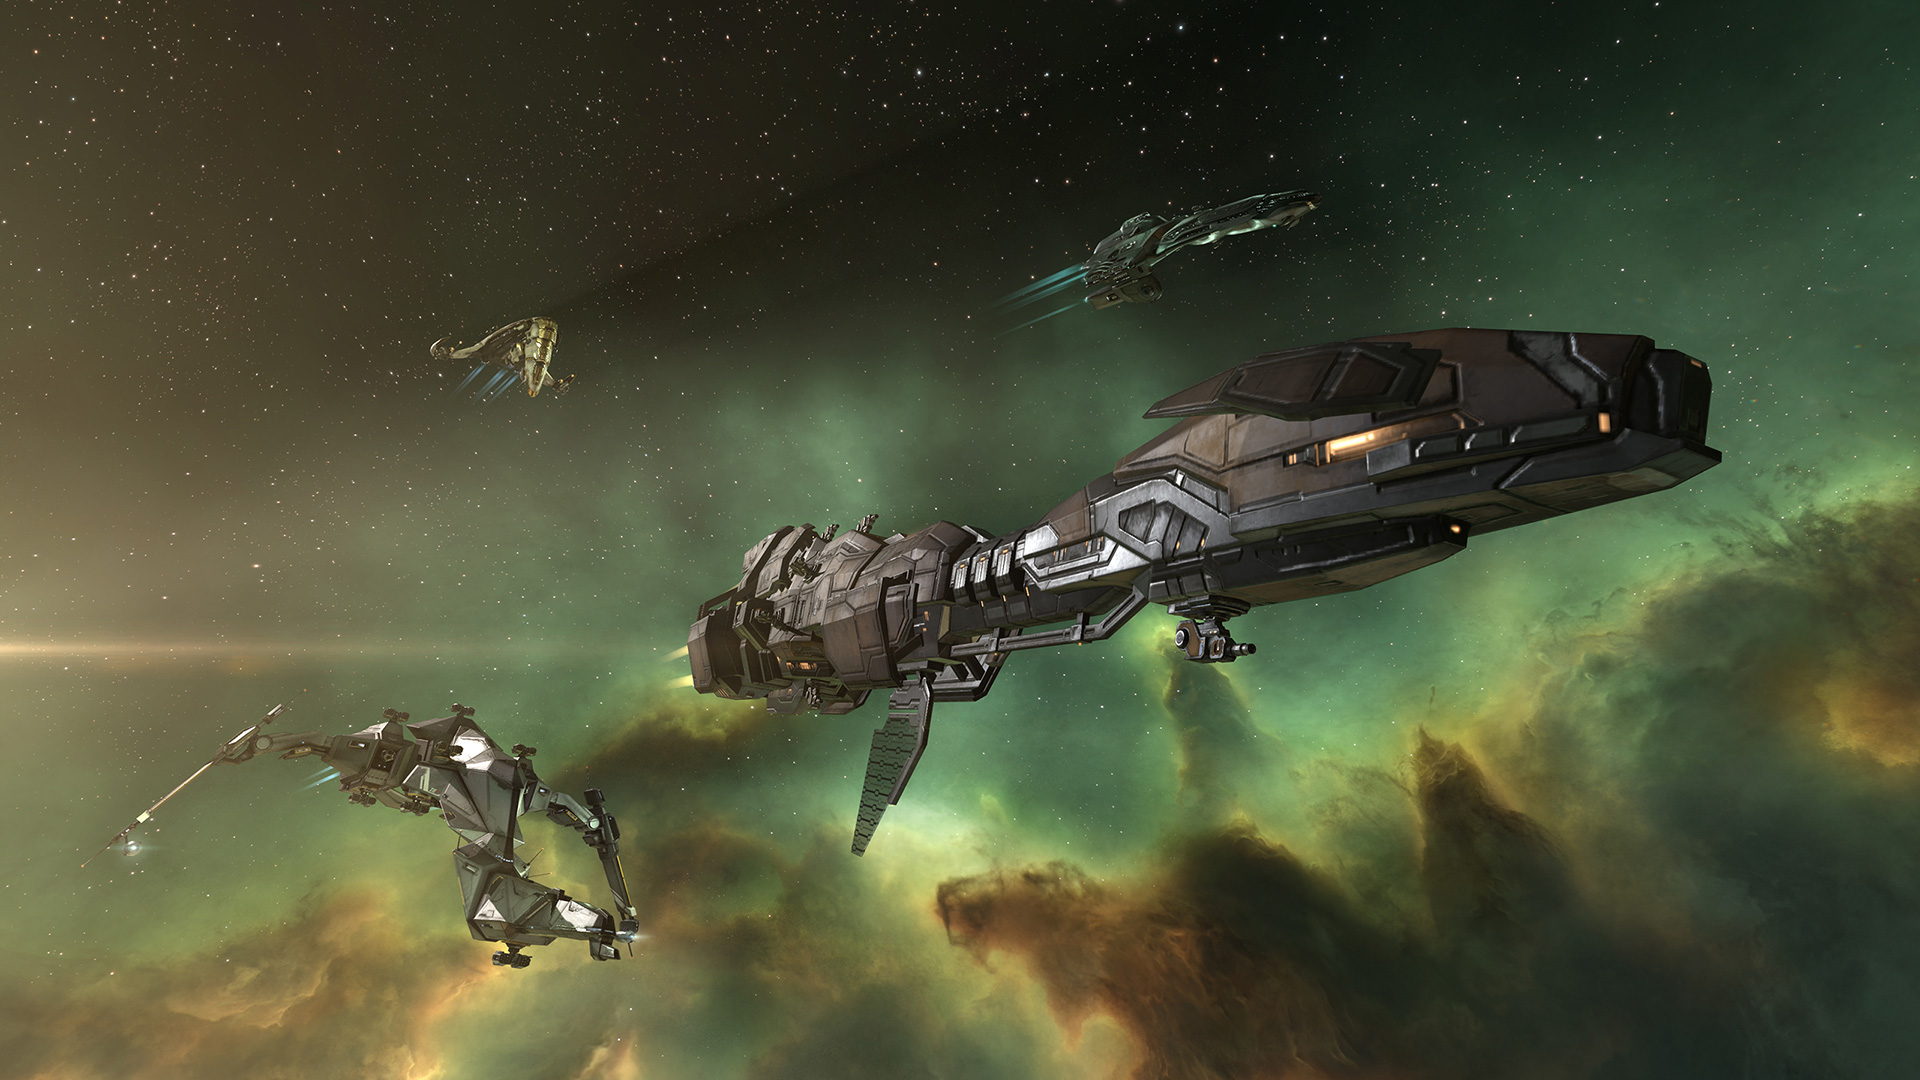 EVE Online to introduce free access to awardwinning scifi game